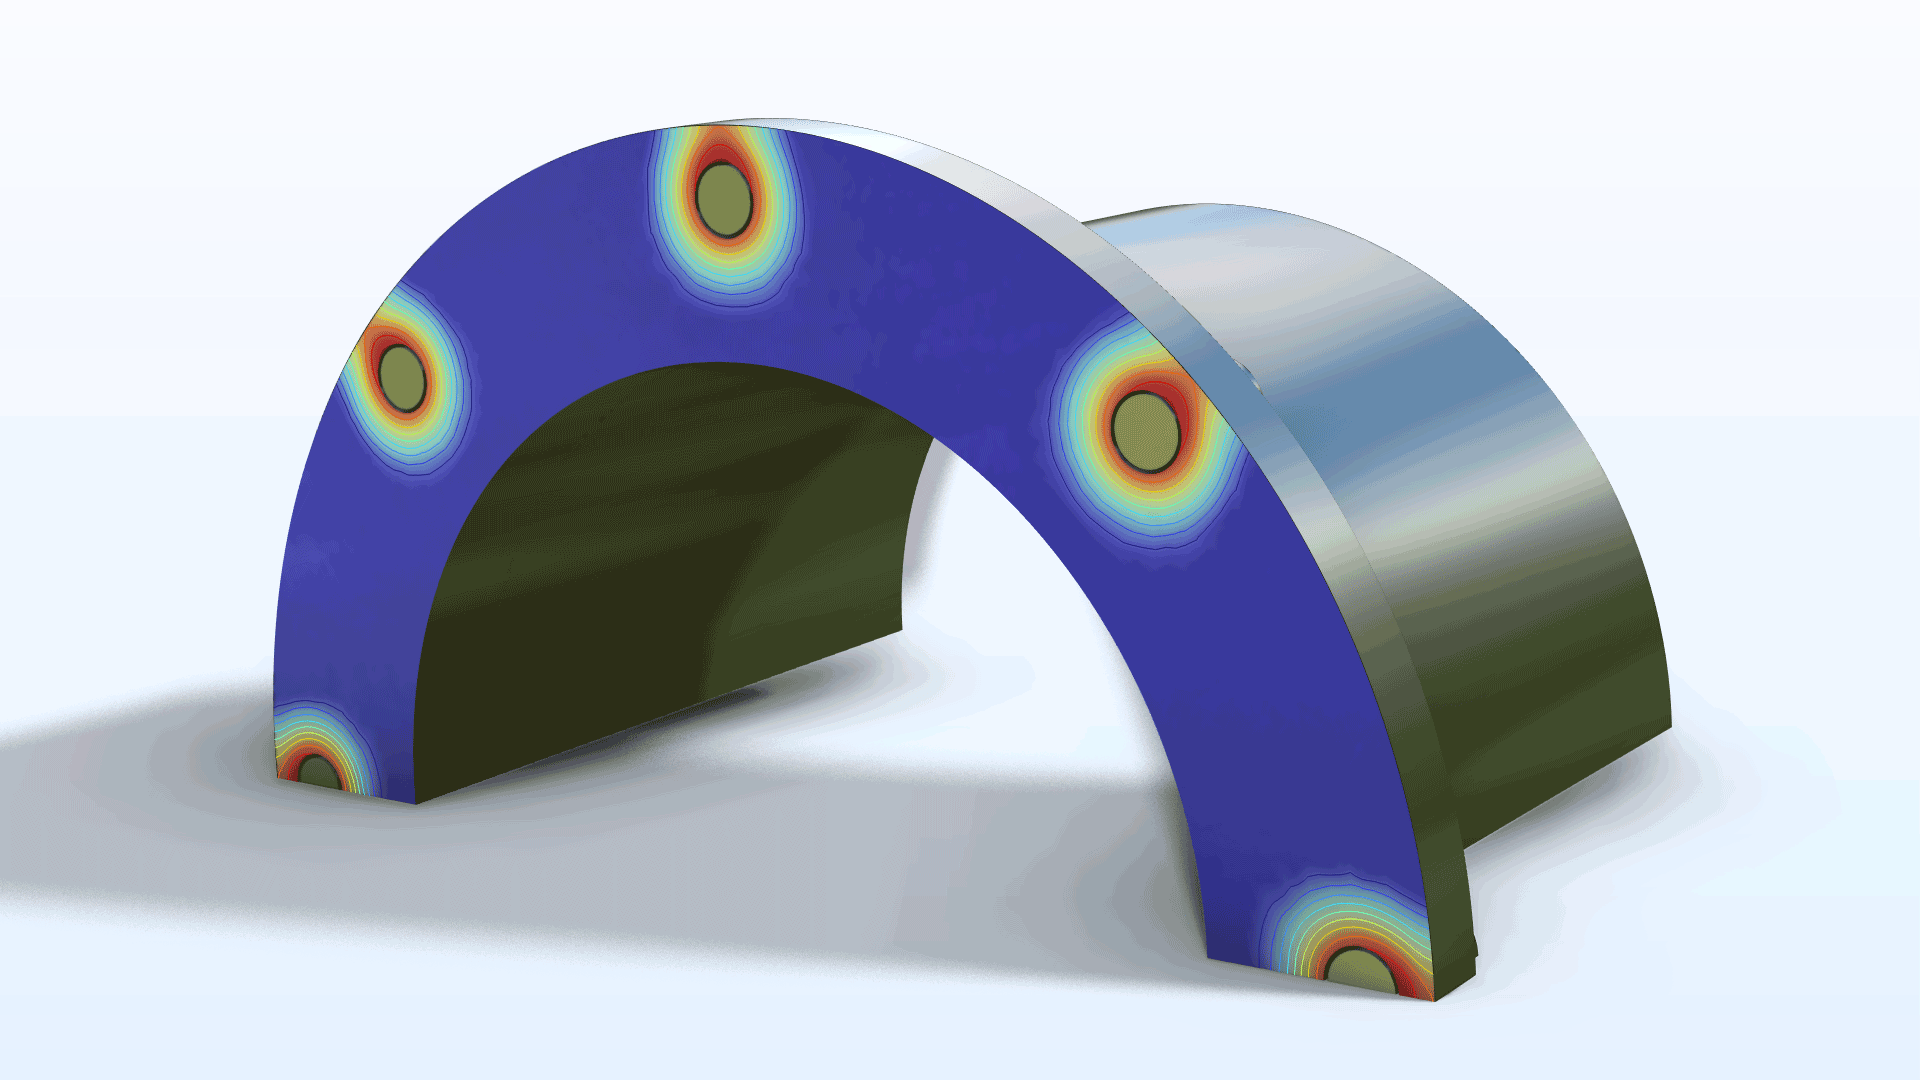 Half of a tube connection model showing the contact pressure in the Rainbow color table.